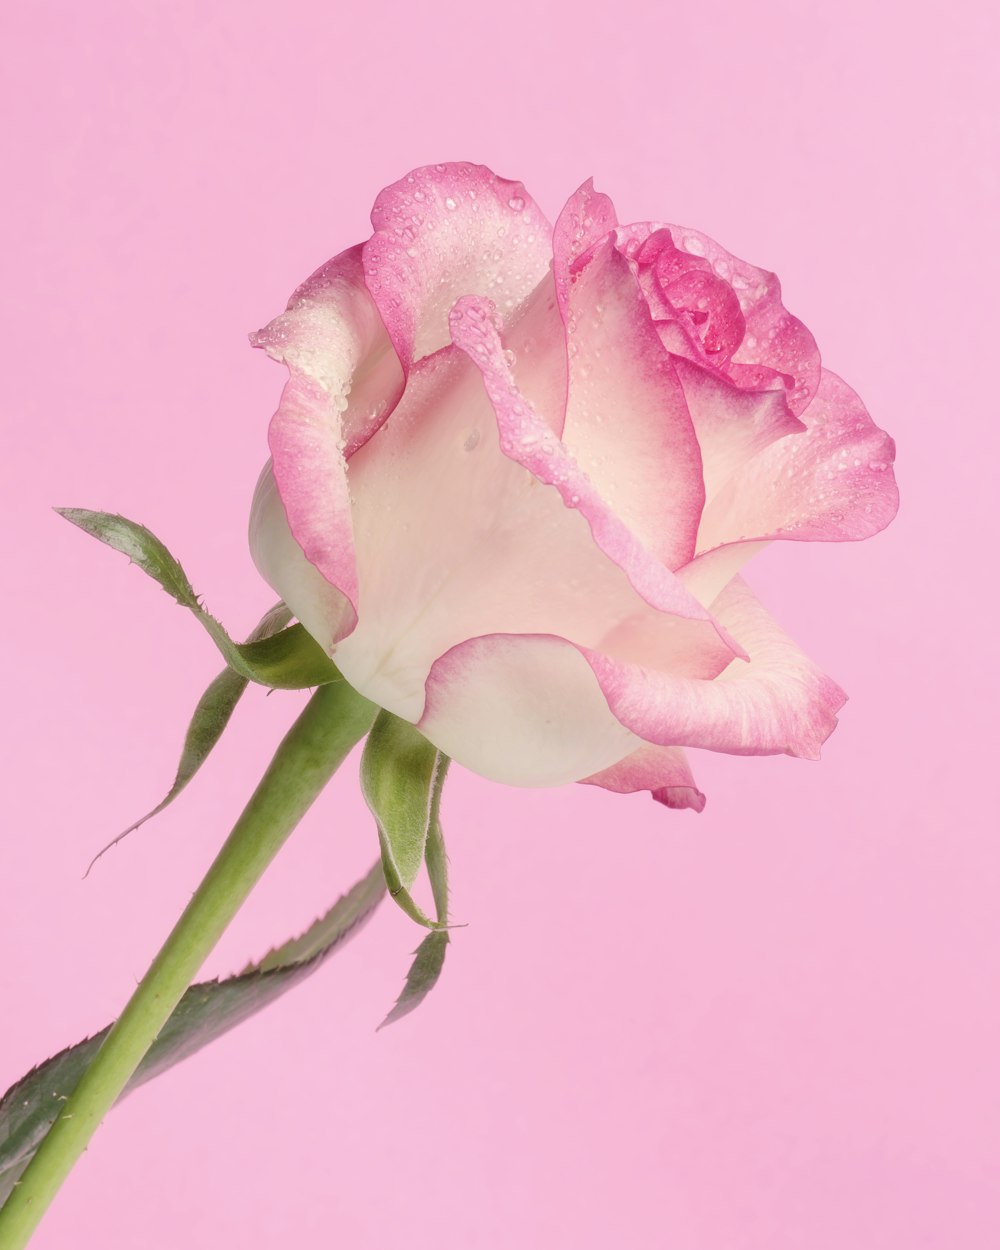 a single pink rose on a pink background